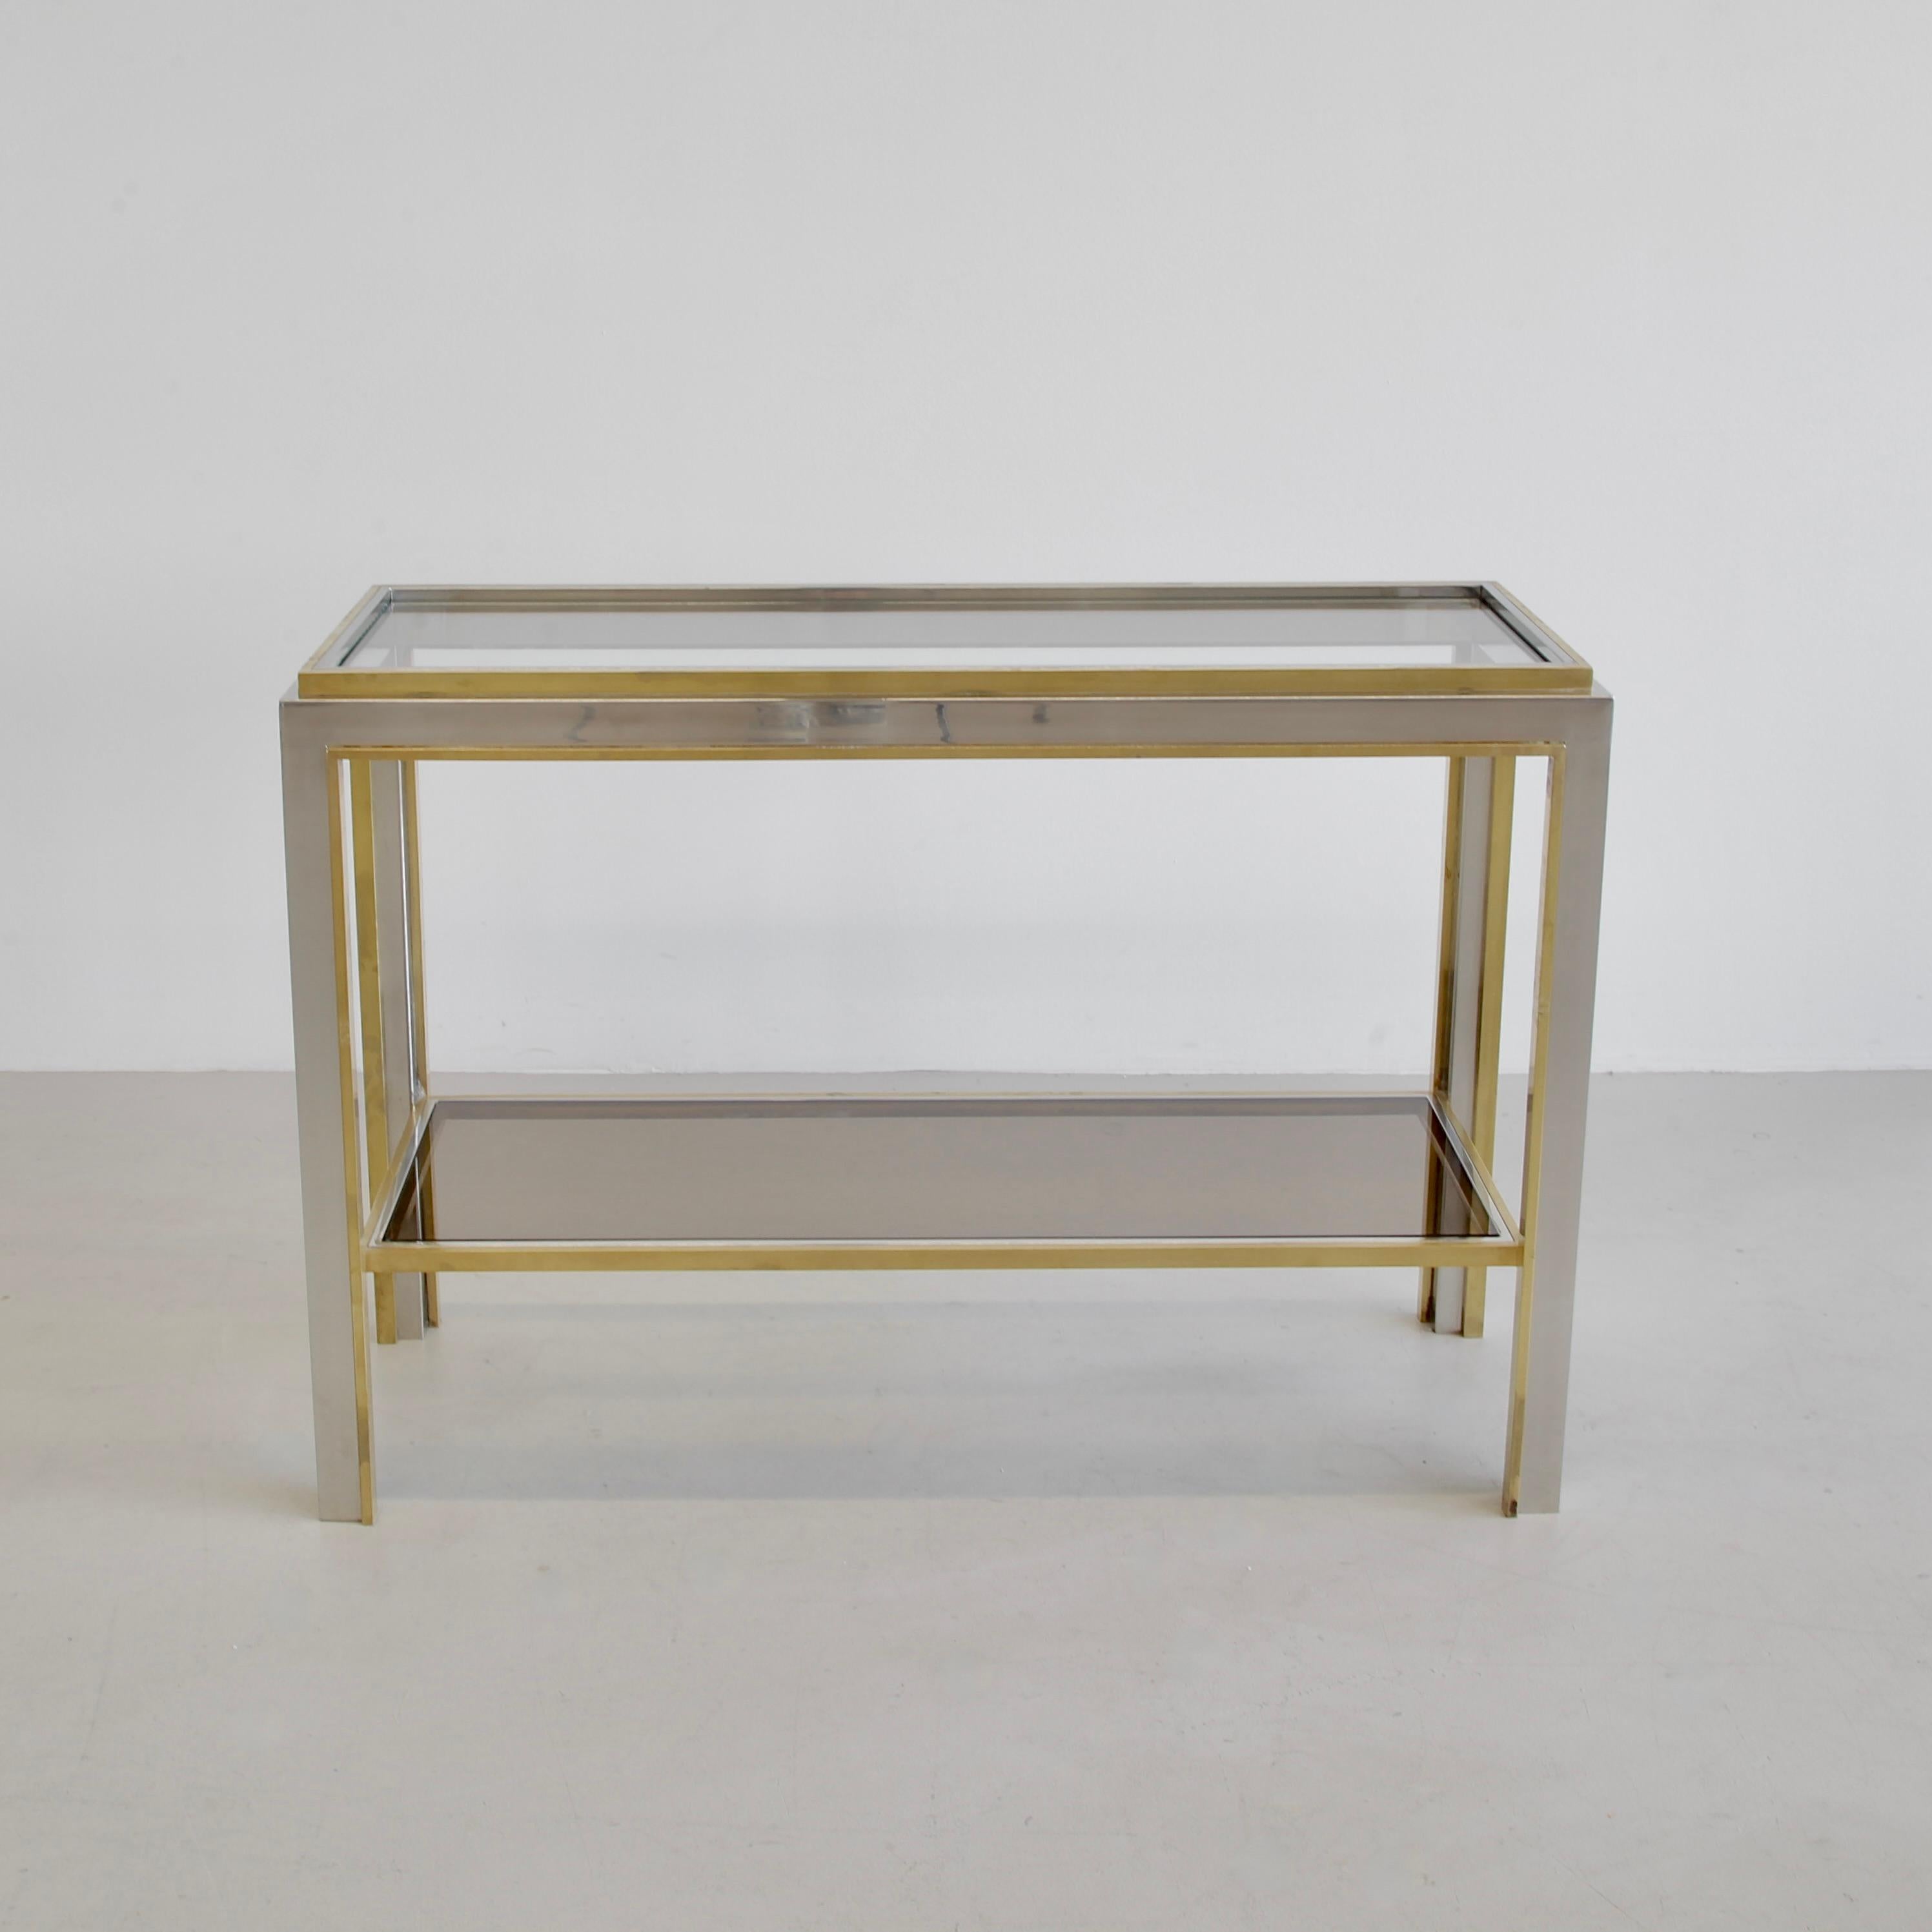 Console Table designed by Romeo Rega. Italy 1970s.

Nickel-plated metal and brass base construction with clear glass top shelf and brown tinted glass on the bottom shelf.
Condition:  

Very good vintage condition.
